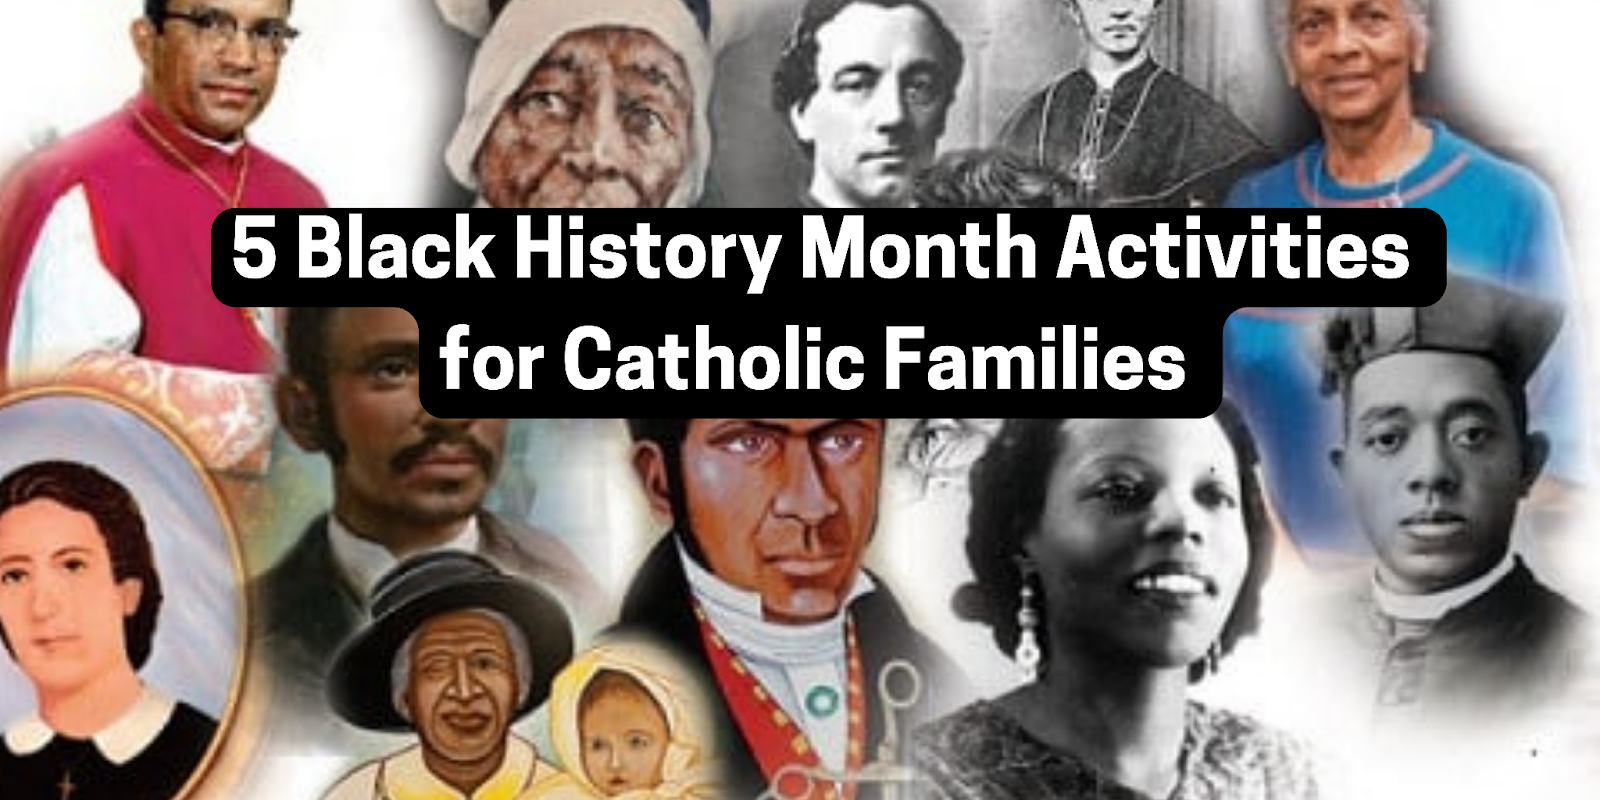 Black History Month Activities for Catholic Families